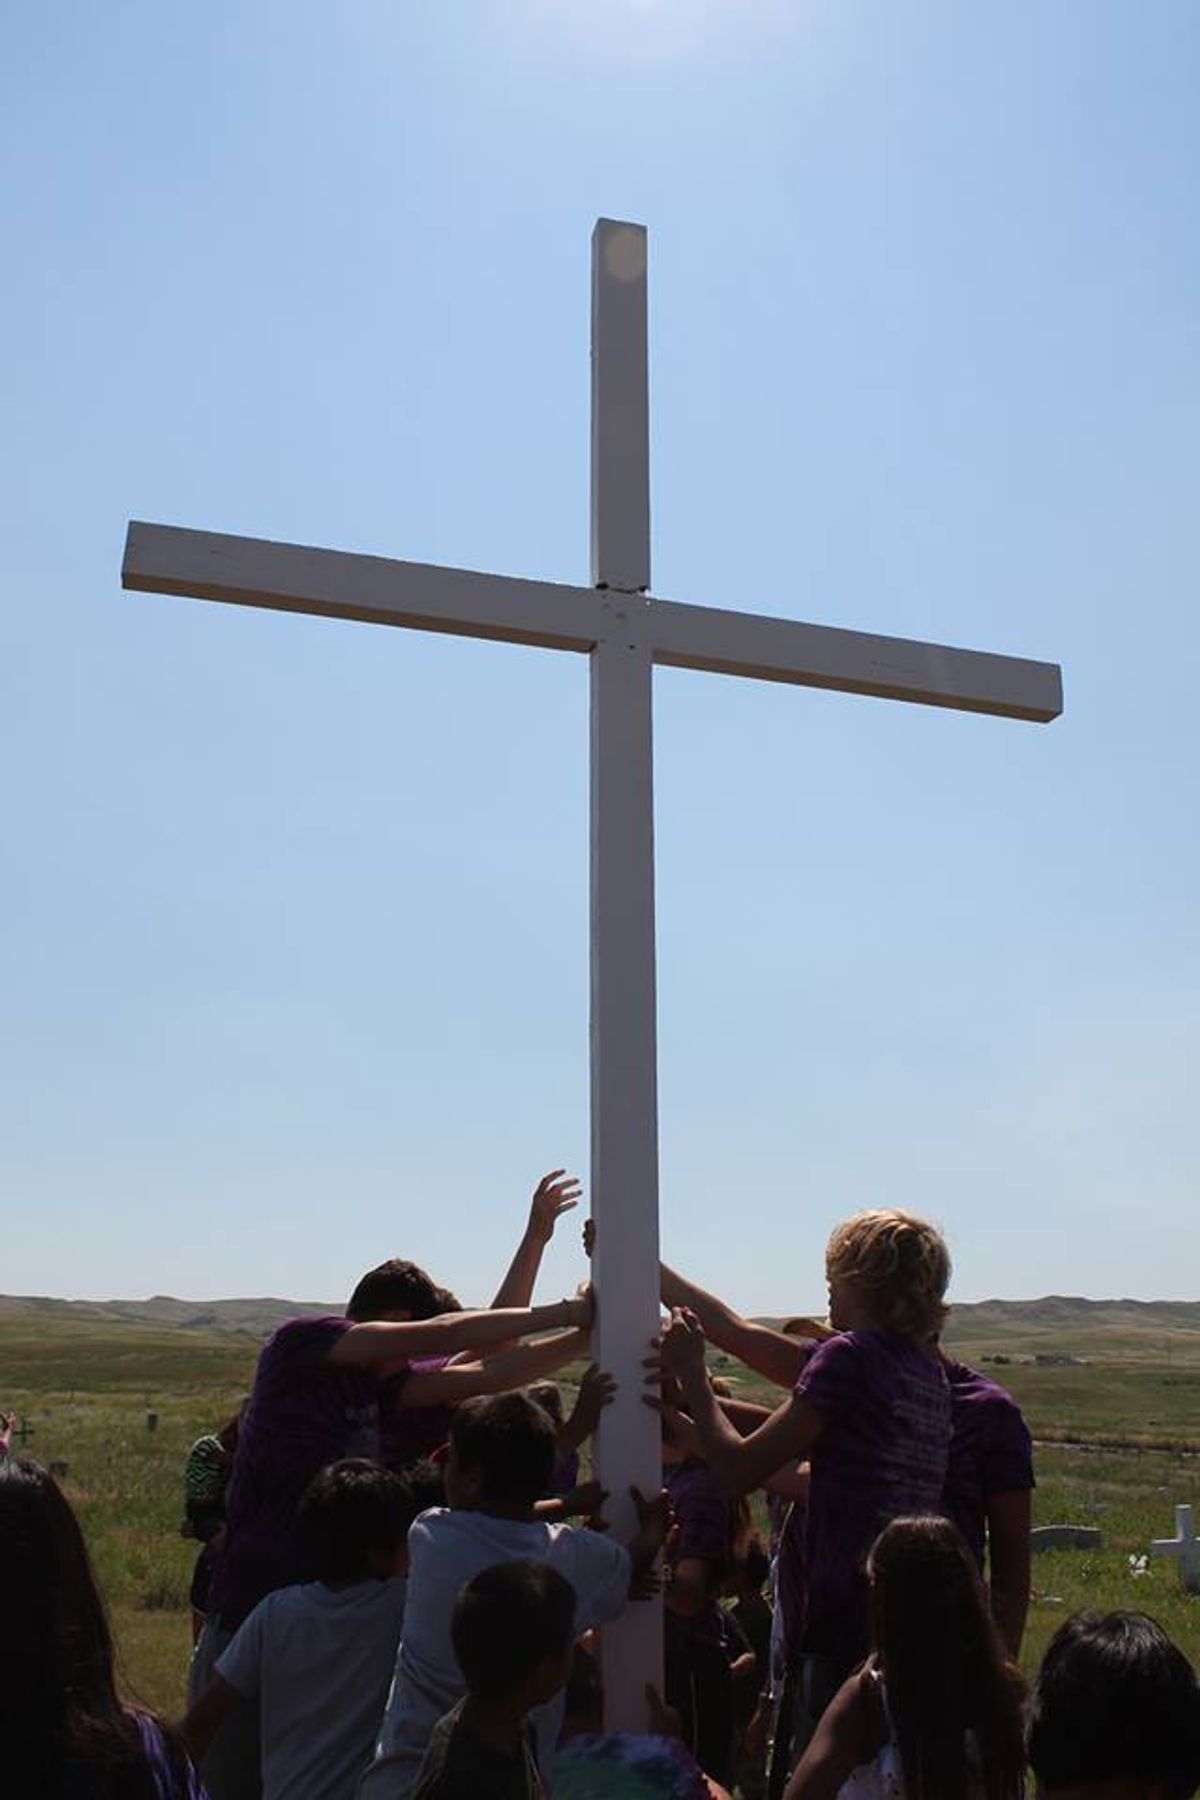 Finding Humanity: A Trip To Pine Ridge Reservation